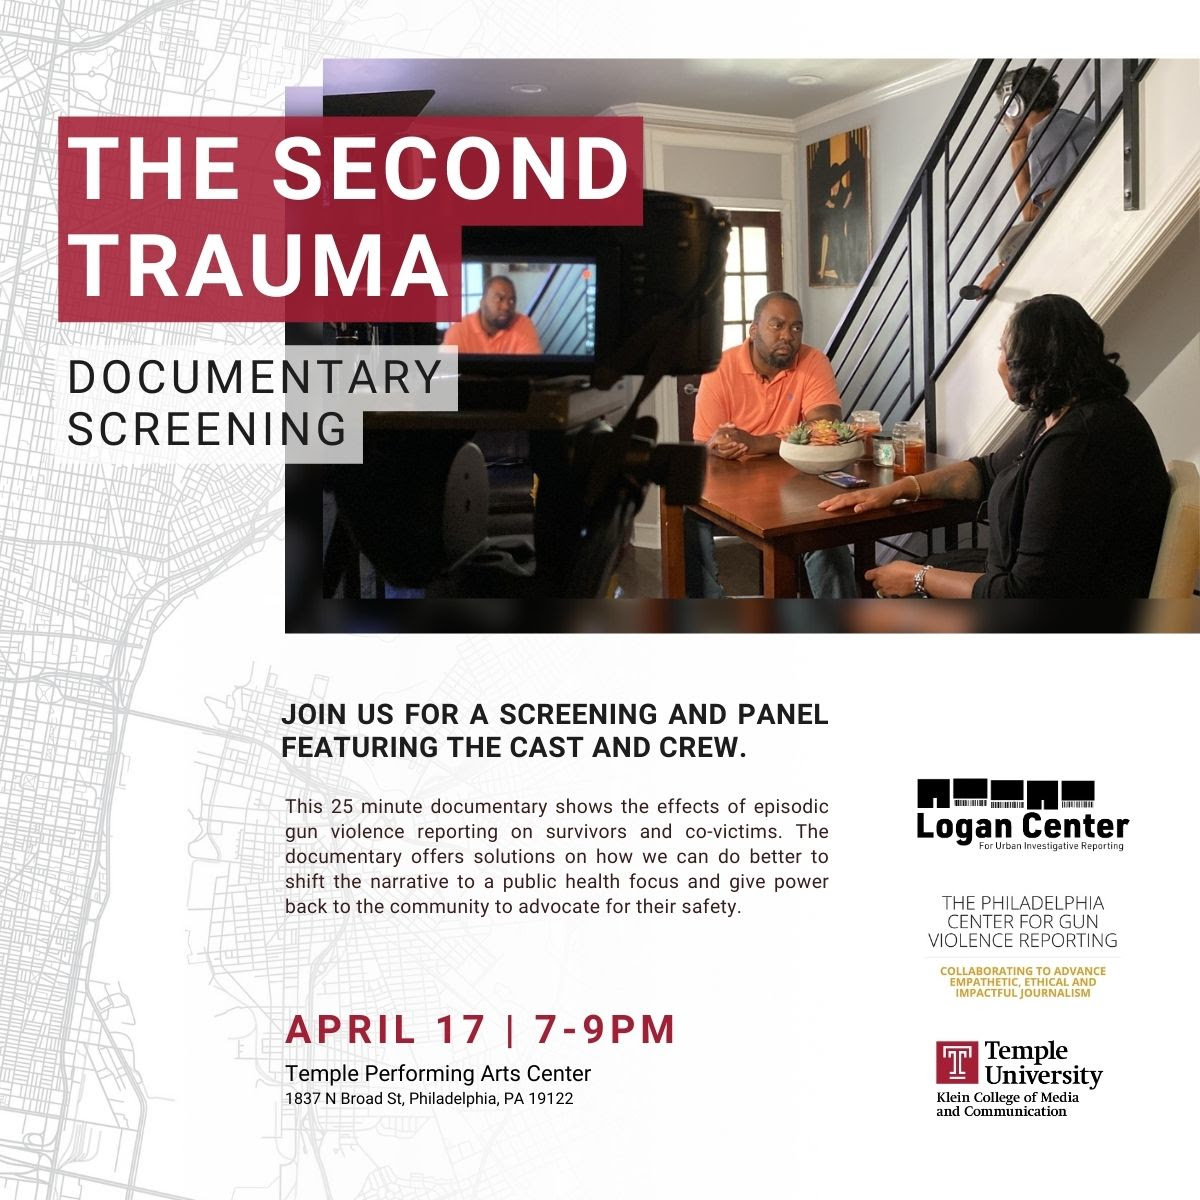 April 17, 7-9PM, join @PCGVR for a screening of 'The Second Trauma,' which shows the effects of gun violence reporting on our community & offers solutions to shift the narrative to a public health focus + advocate for community safety. Register 👉bit.ly/3TLegO8